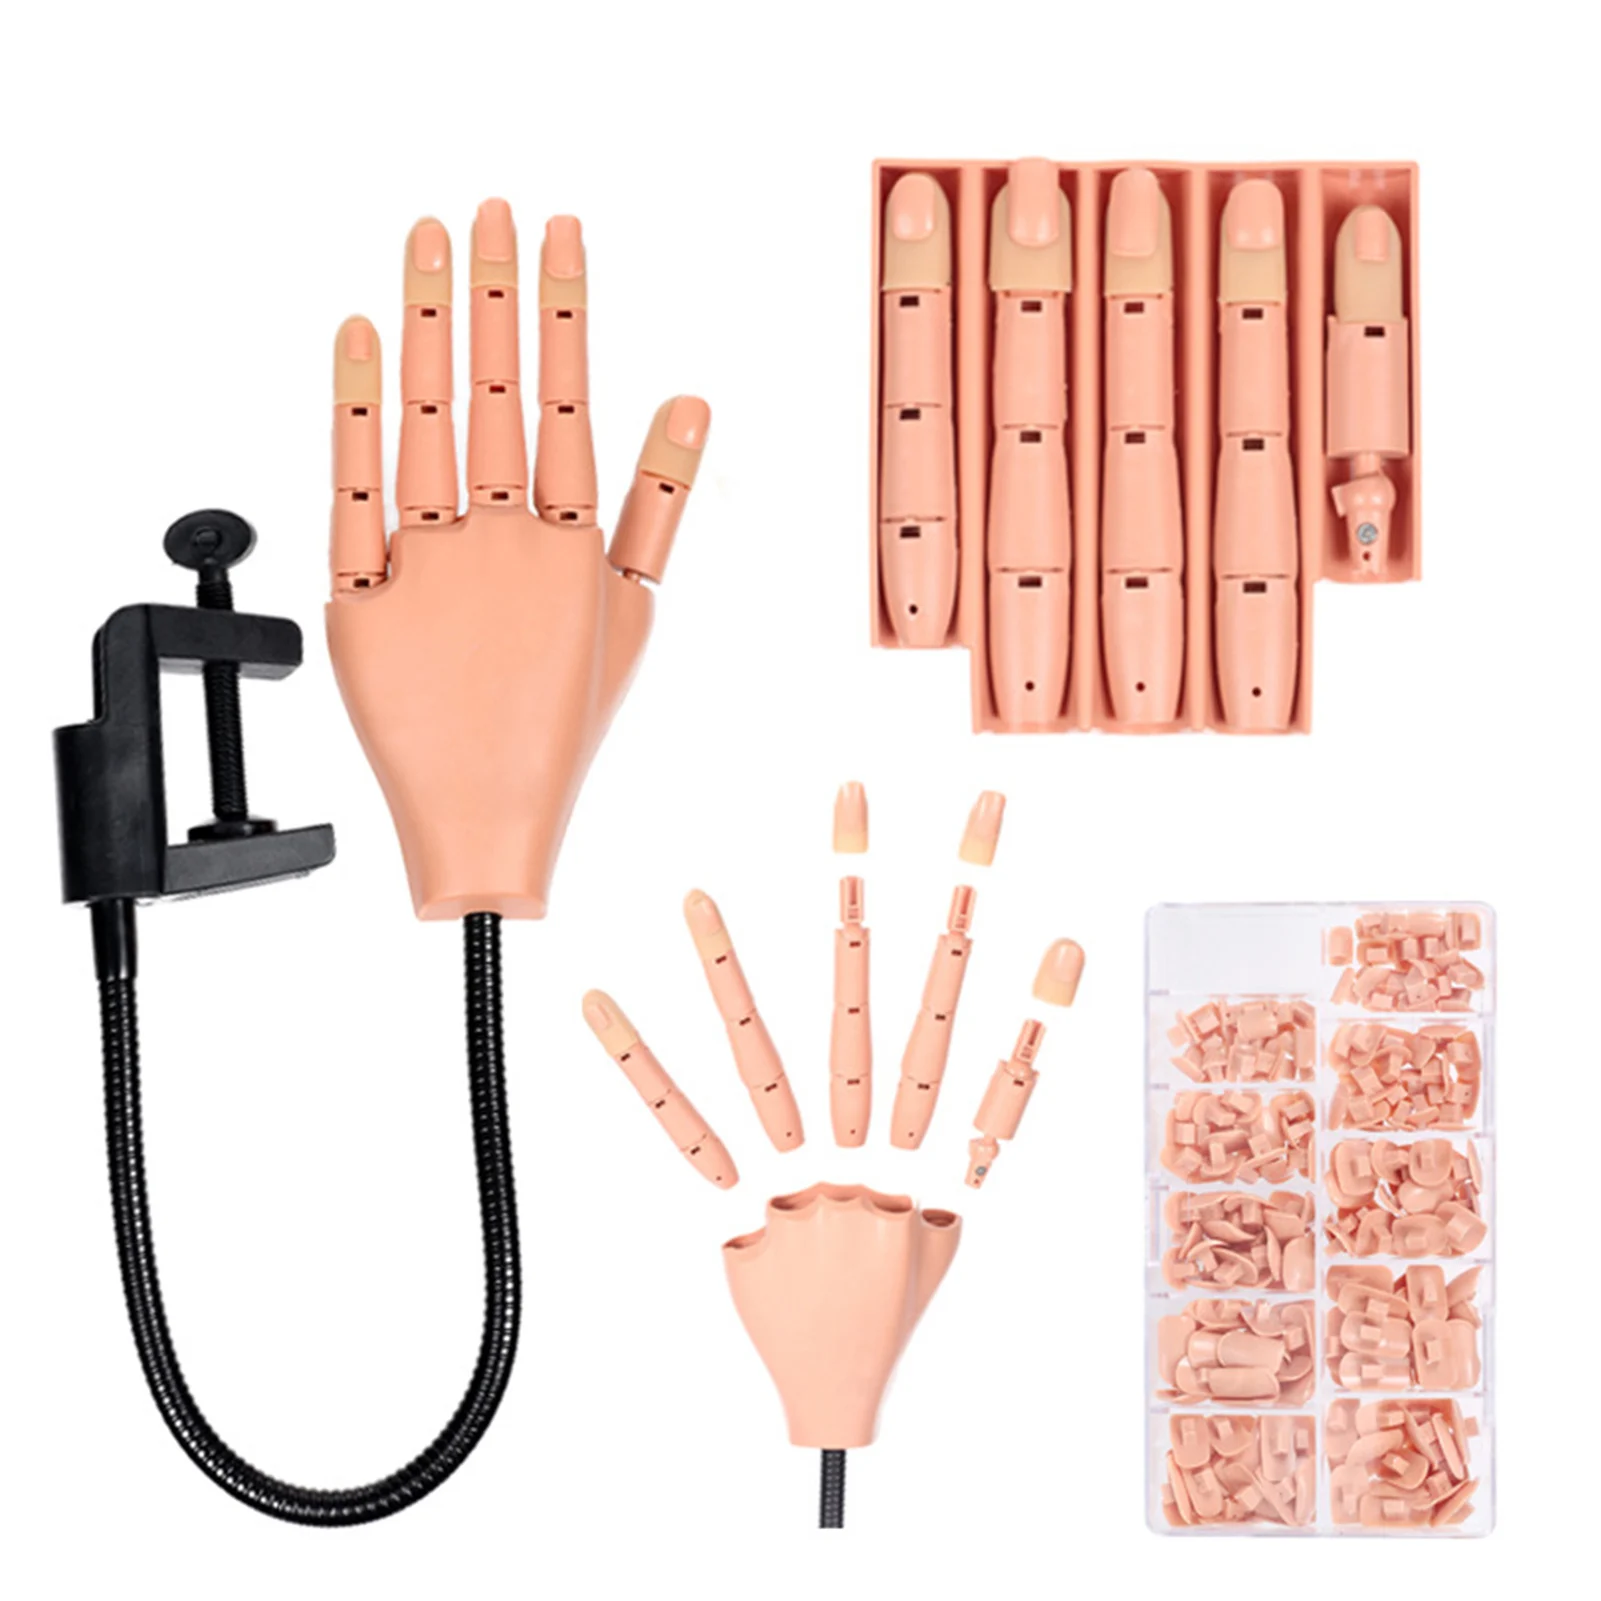 

Salon Reusable ABS Movable For Beginners Flexible Training Tool Nails Practice Model Hand Kit DIY Manicure 200pcs False Tips